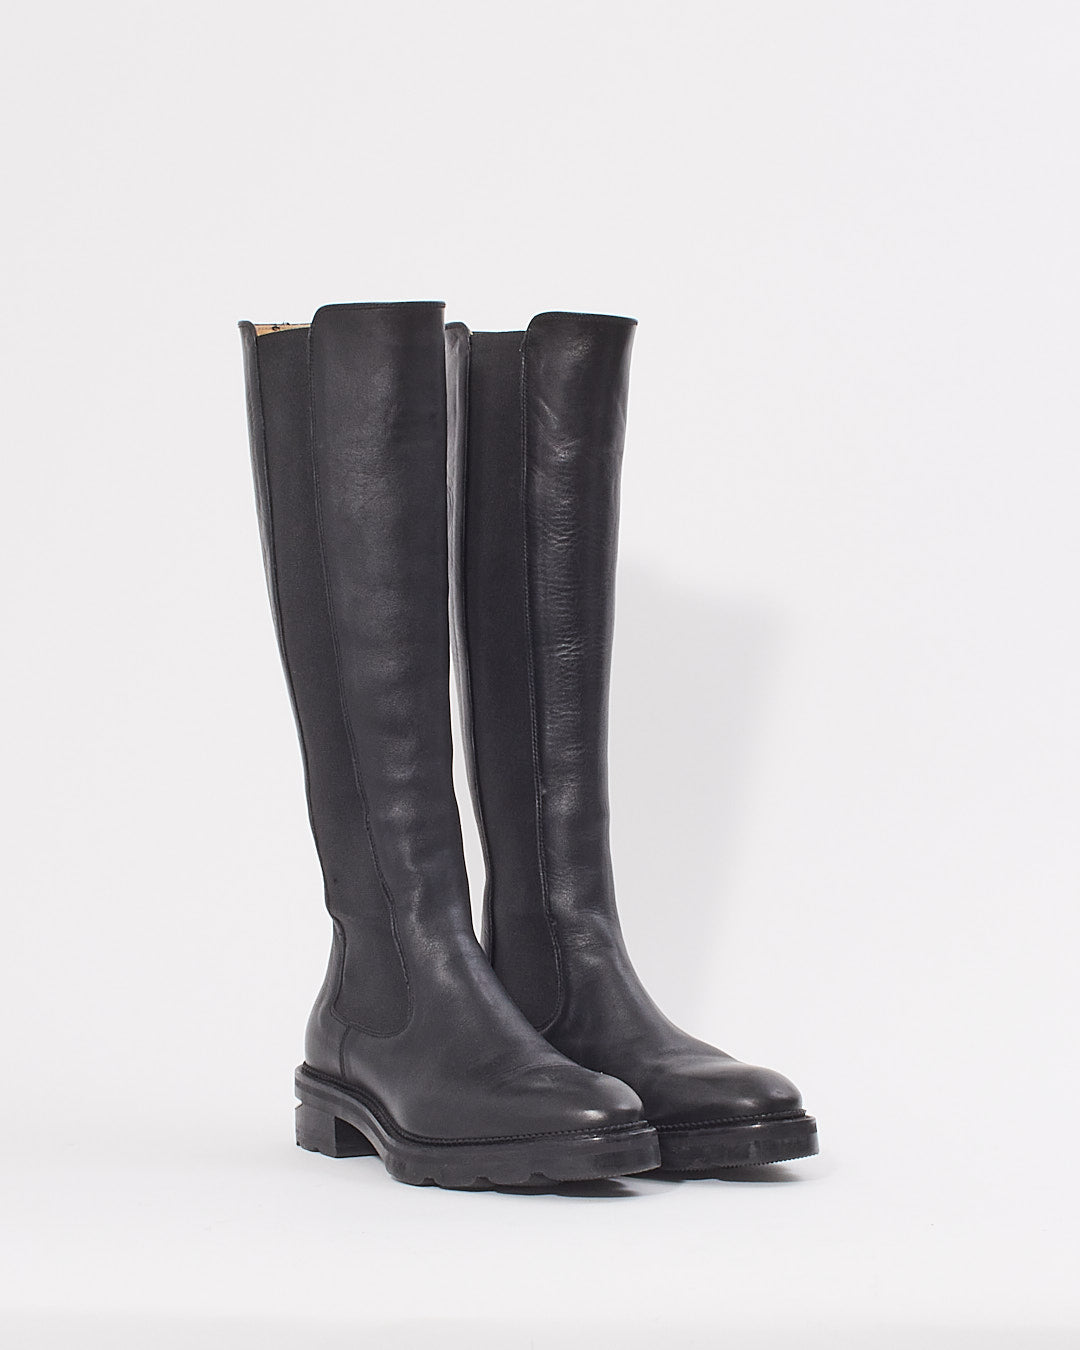 Alexander Wang Black Leather Boots - 38.5